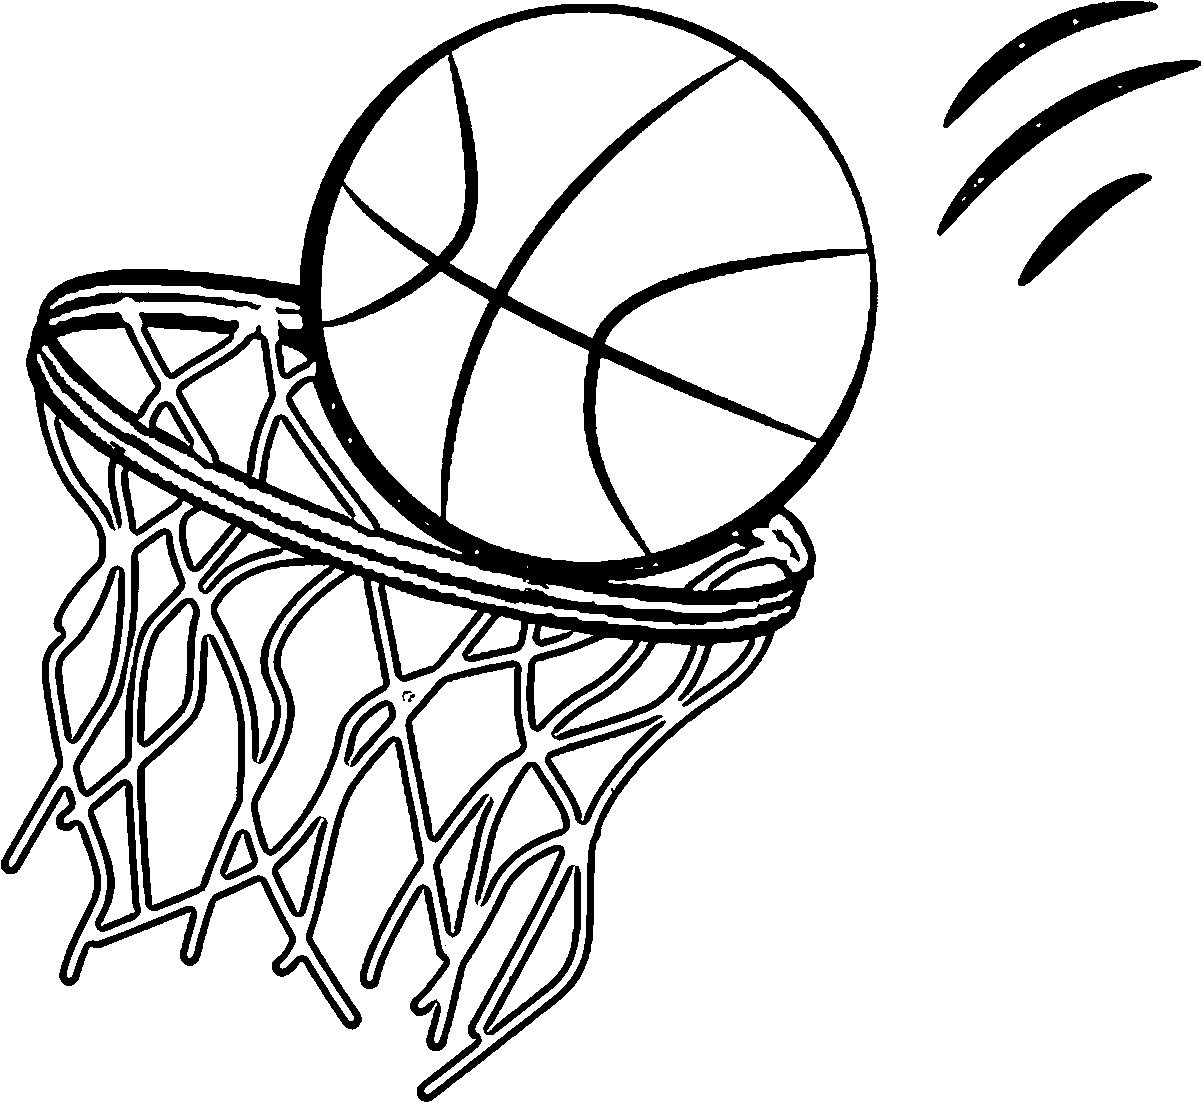 Basketball Coloring Book
 Basketball Coloring Pages Printable AZ Coloring Pages